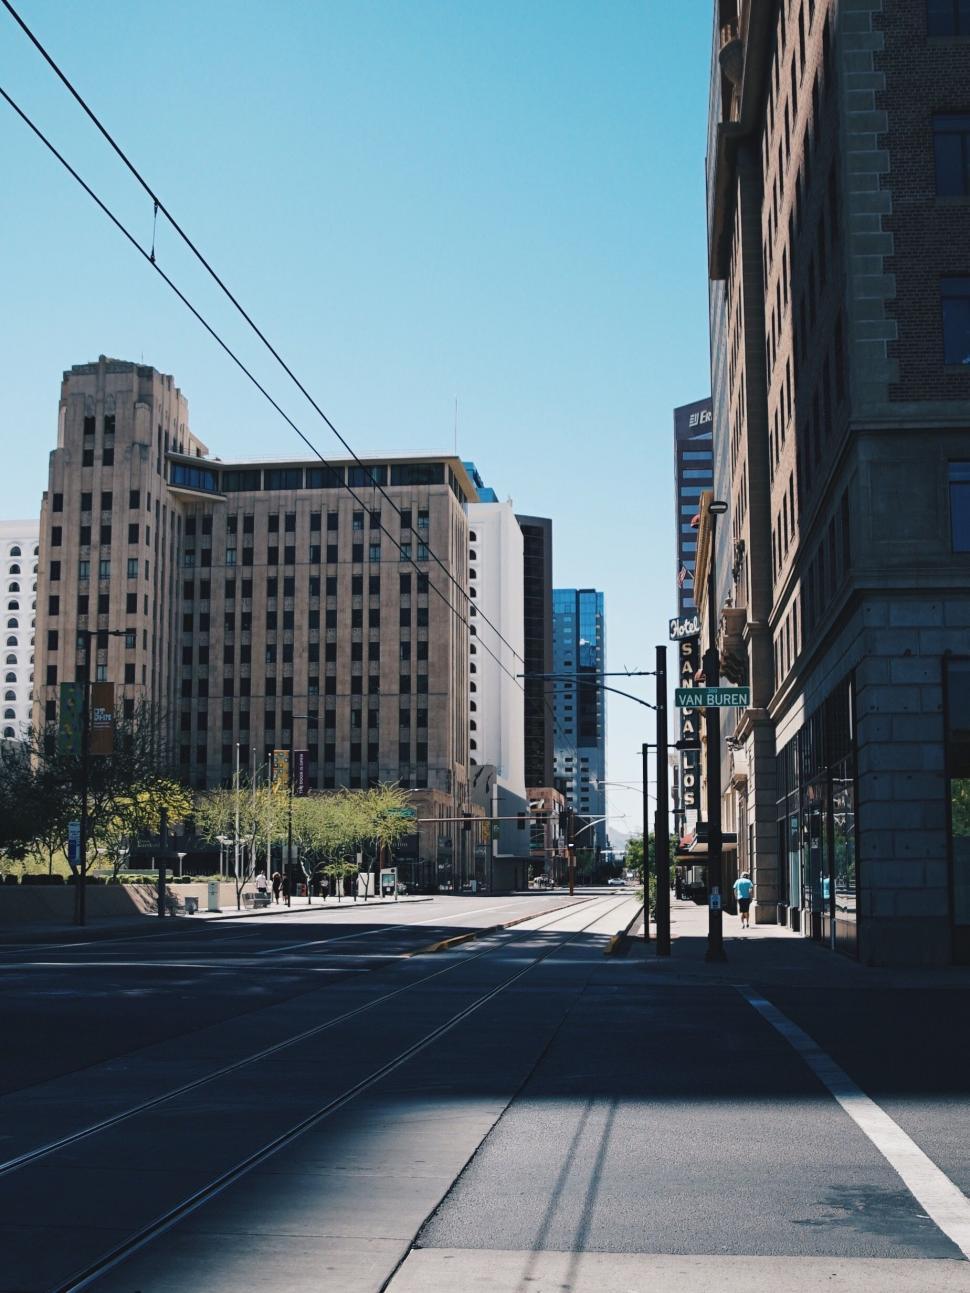 Free Image of City Street With Tall Buildings 